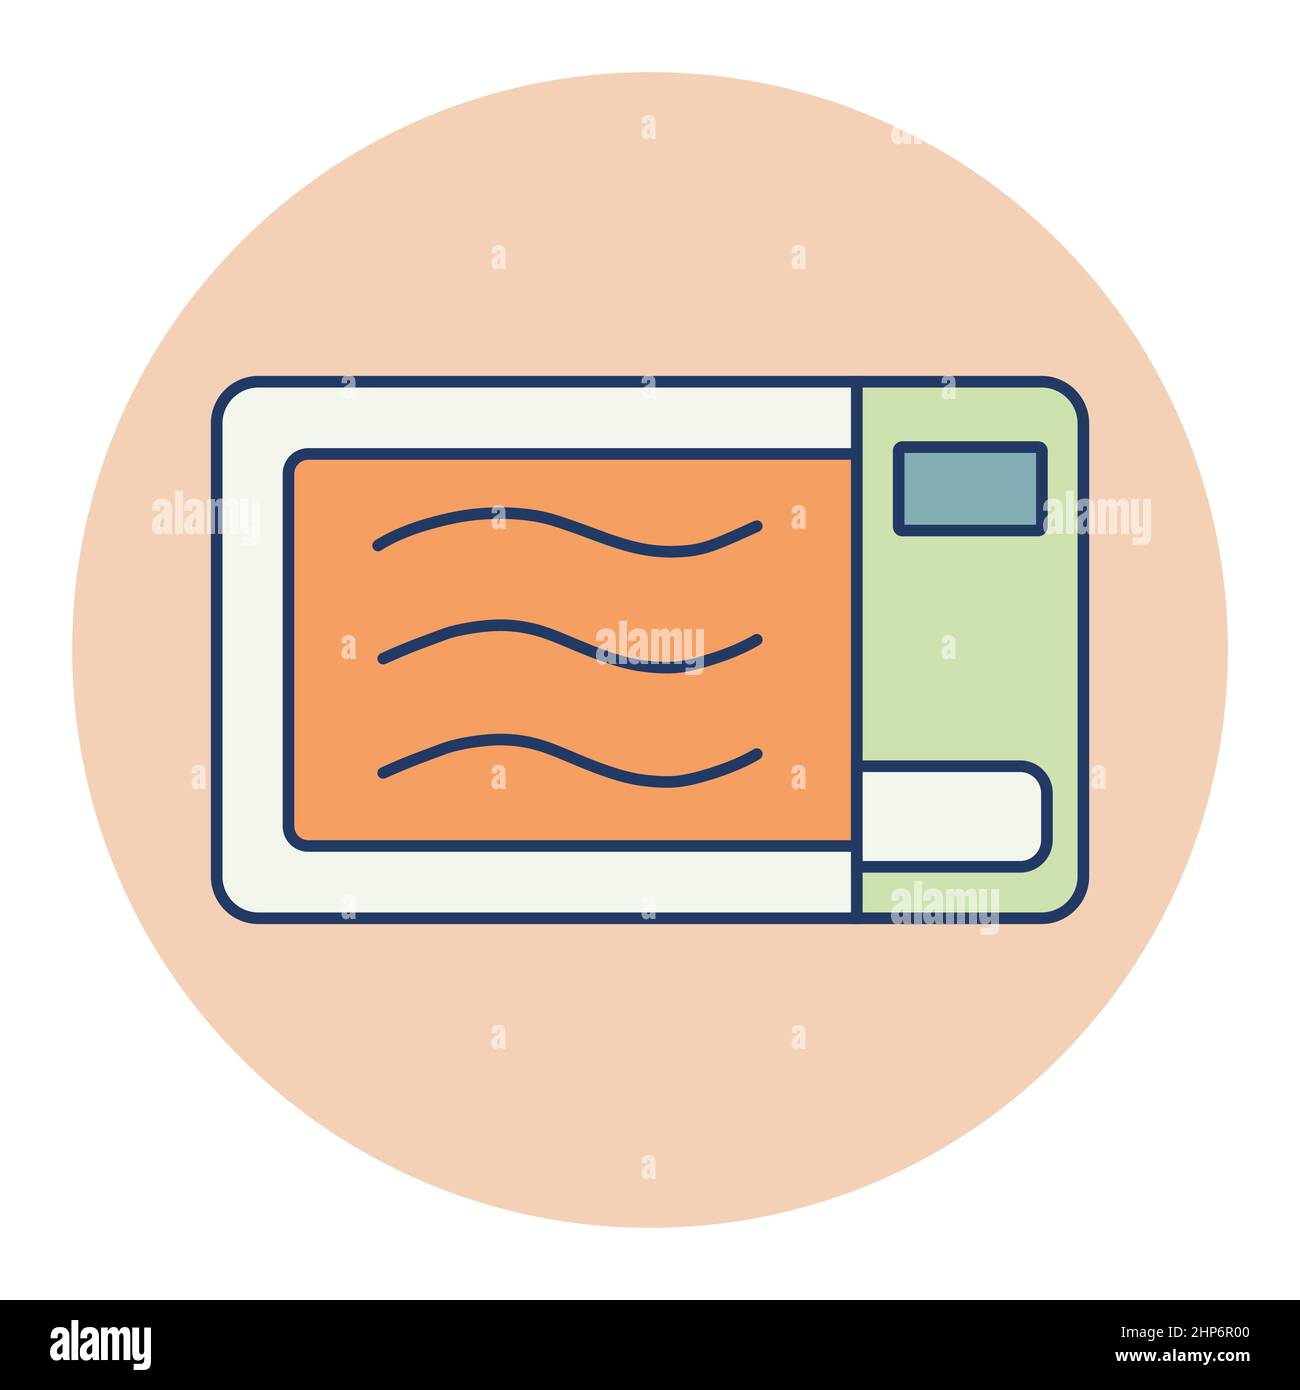 Microwave vector icon. Electric kitchen appliance Stock Vector